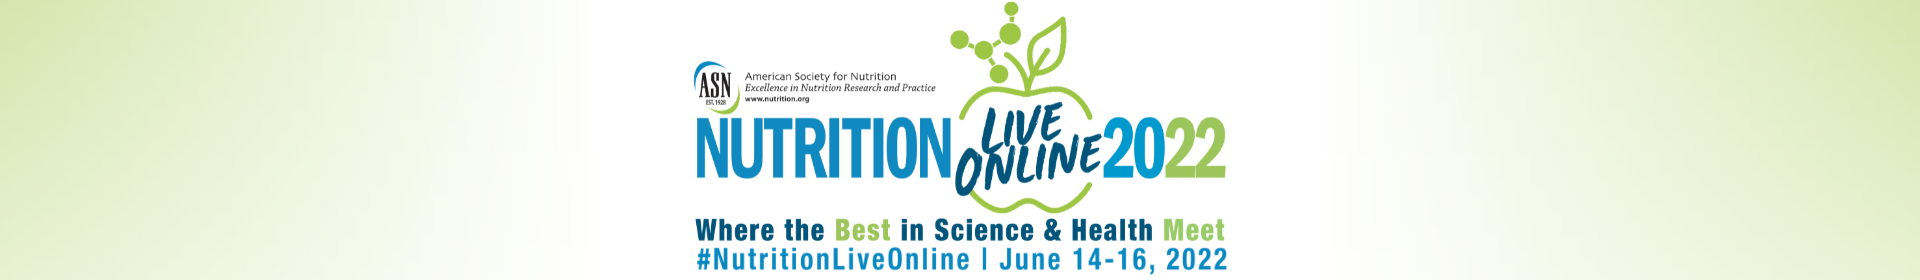 NUTRITION 2022 LIVE ONLINE Submission Event Banner